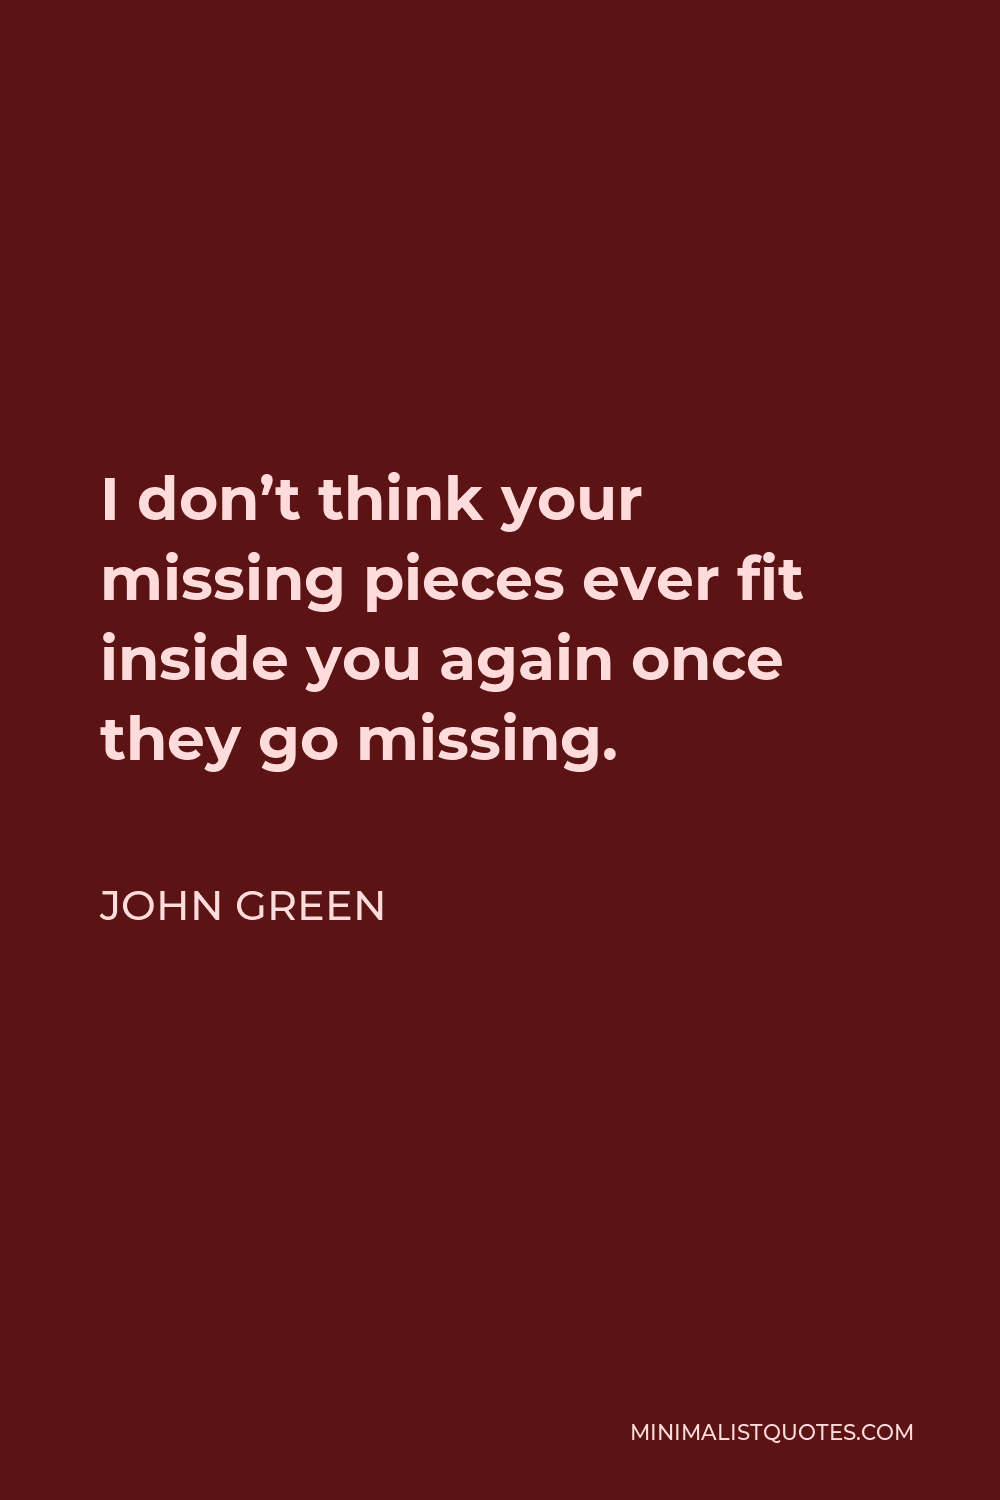 John Green Quote - I don’t think your missing pieces ever fit inside you again once they go missing.